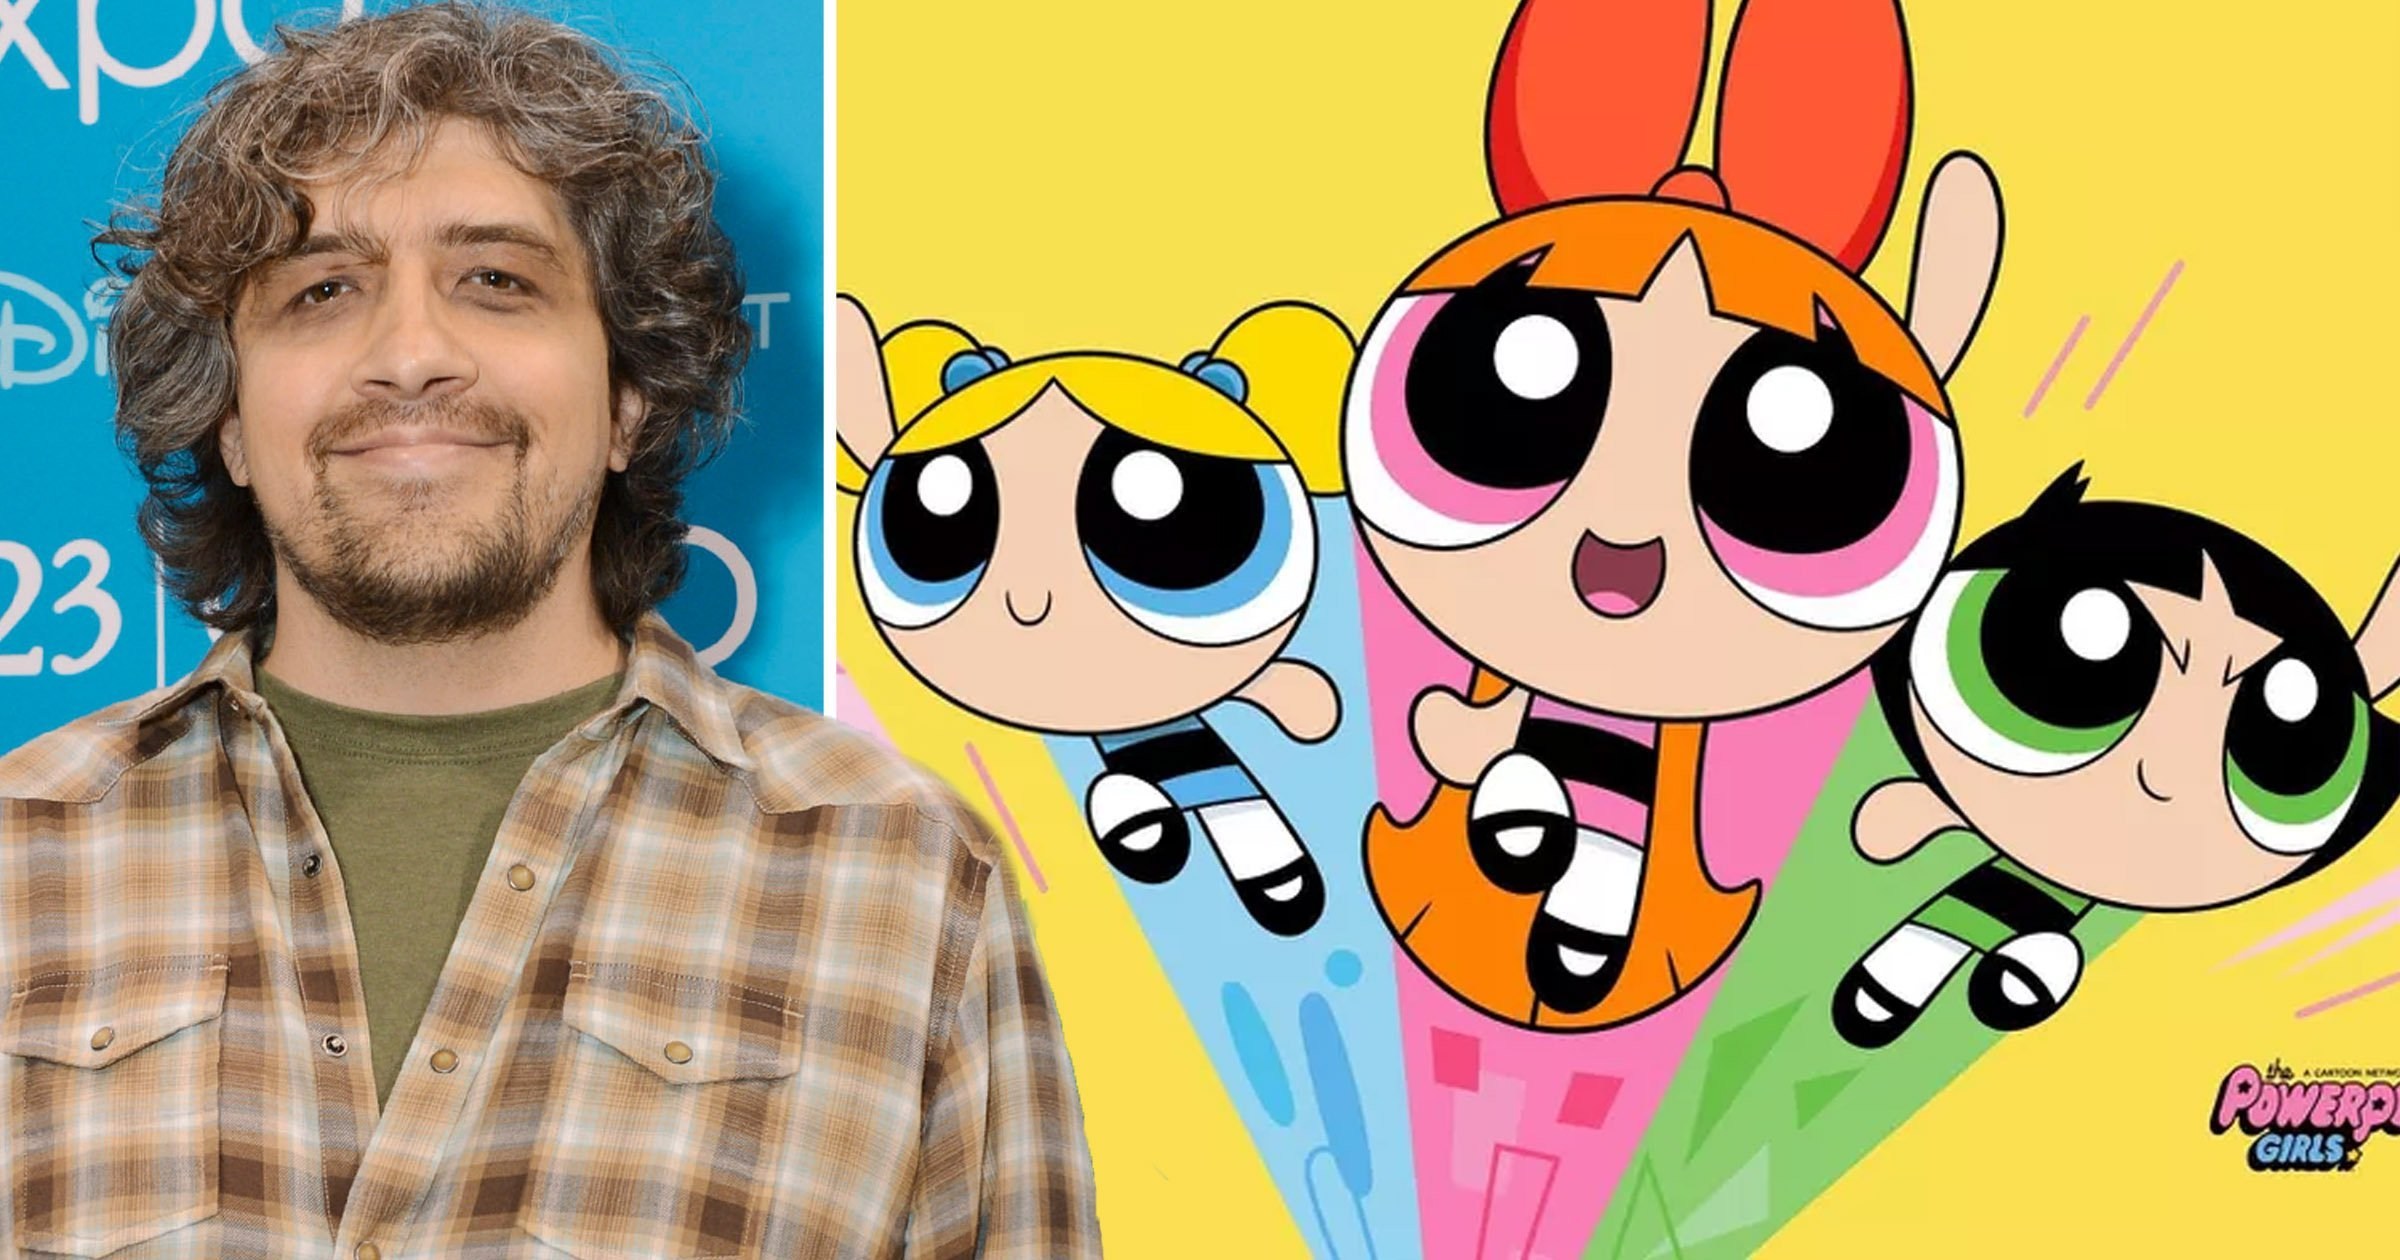 The Powerpuff Girls creator shares thoughts on ‘gritty’ remake he has ‘nothing to do with’